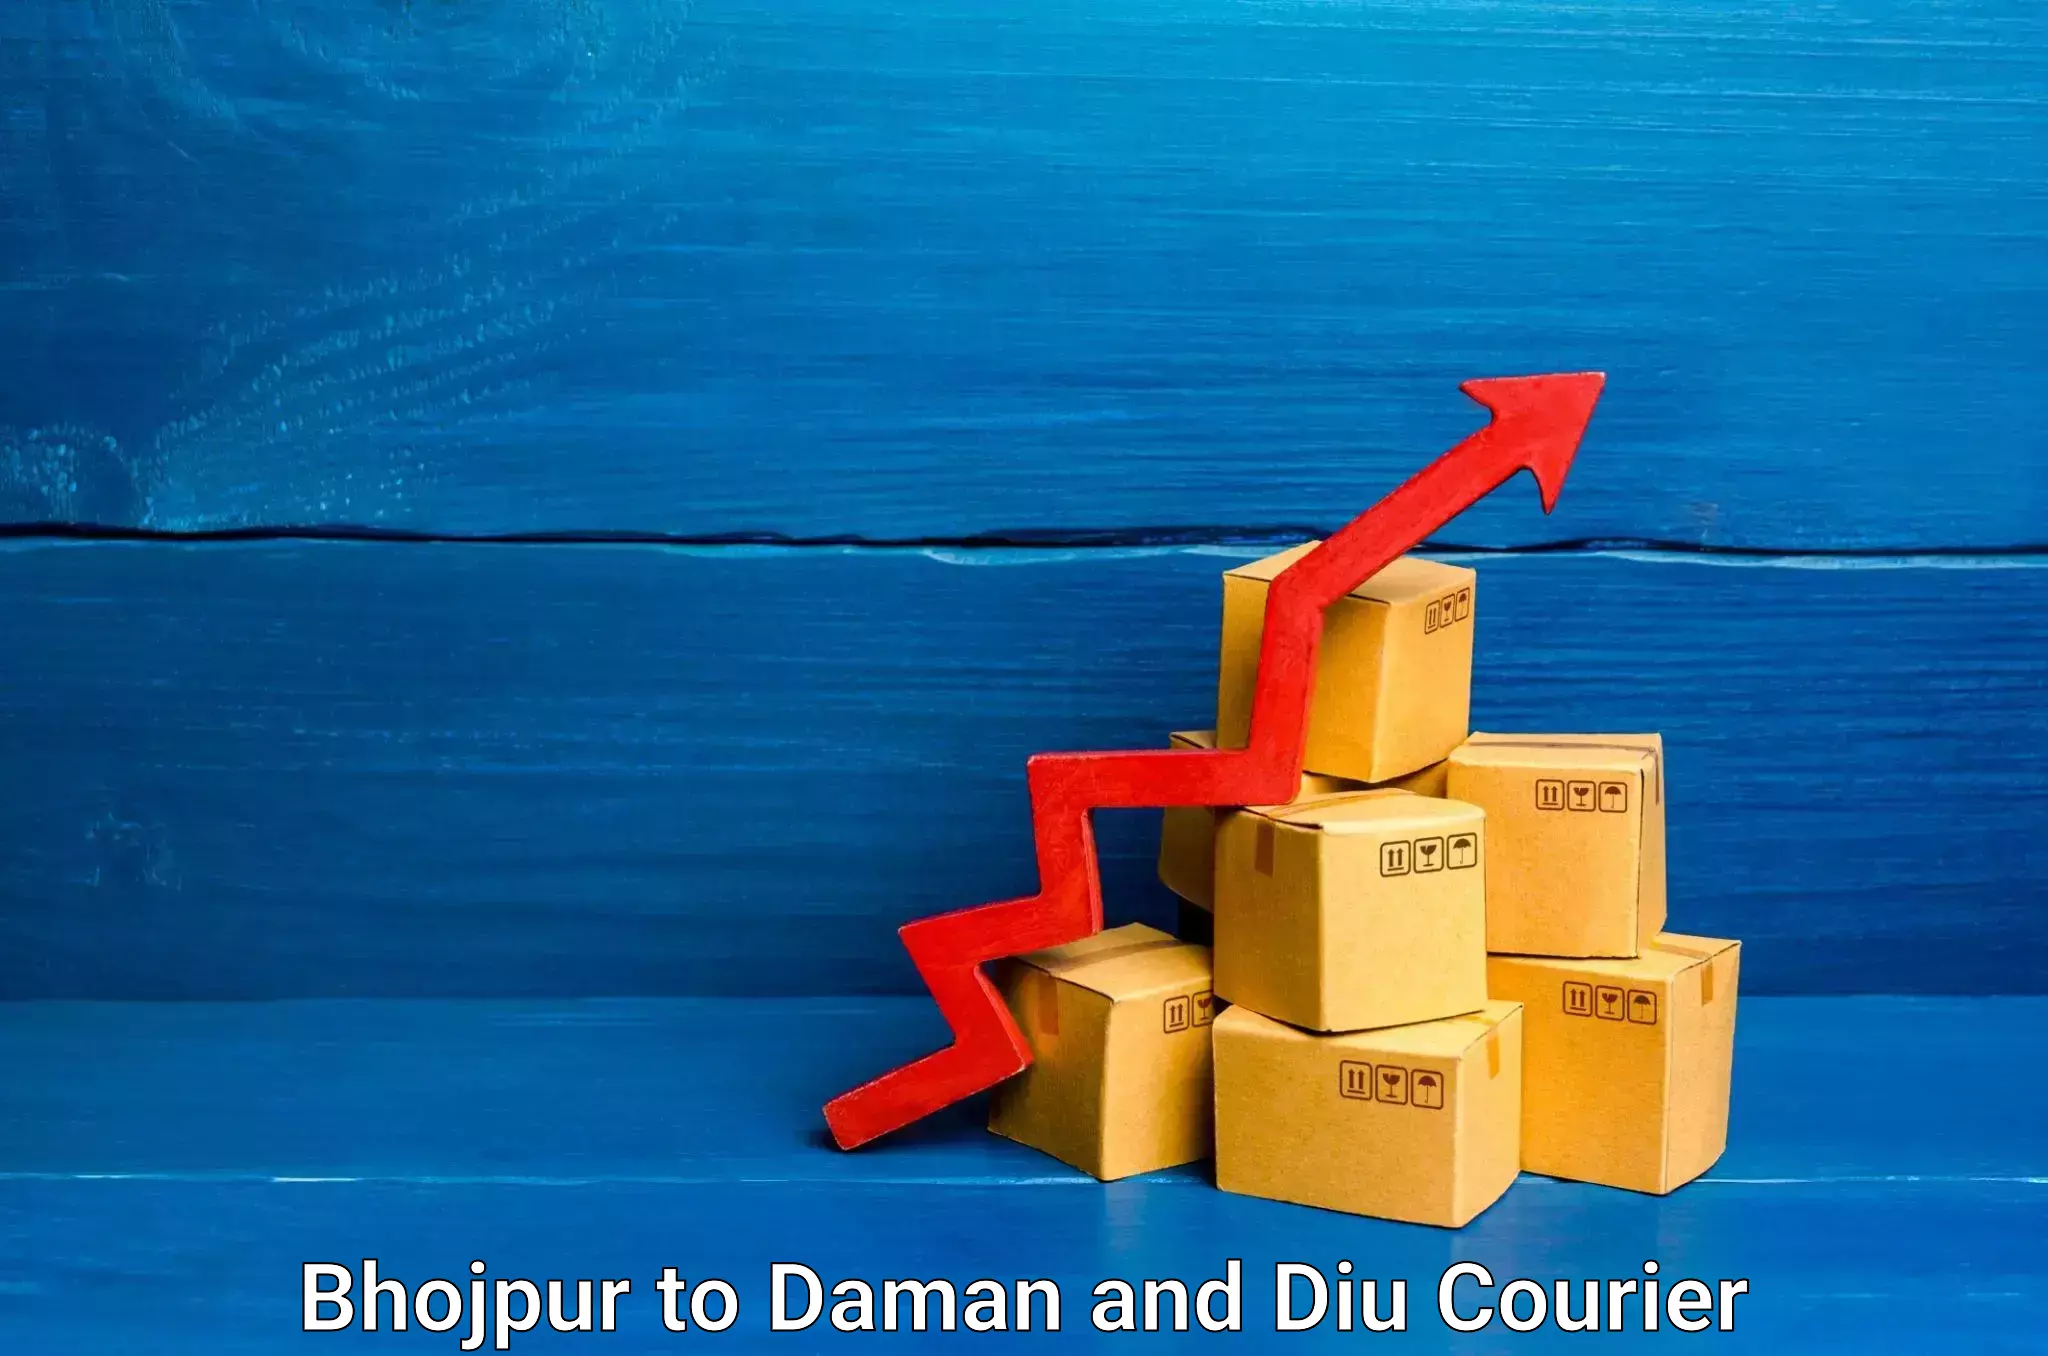 Furniture delivery service Bhojpur to Daman